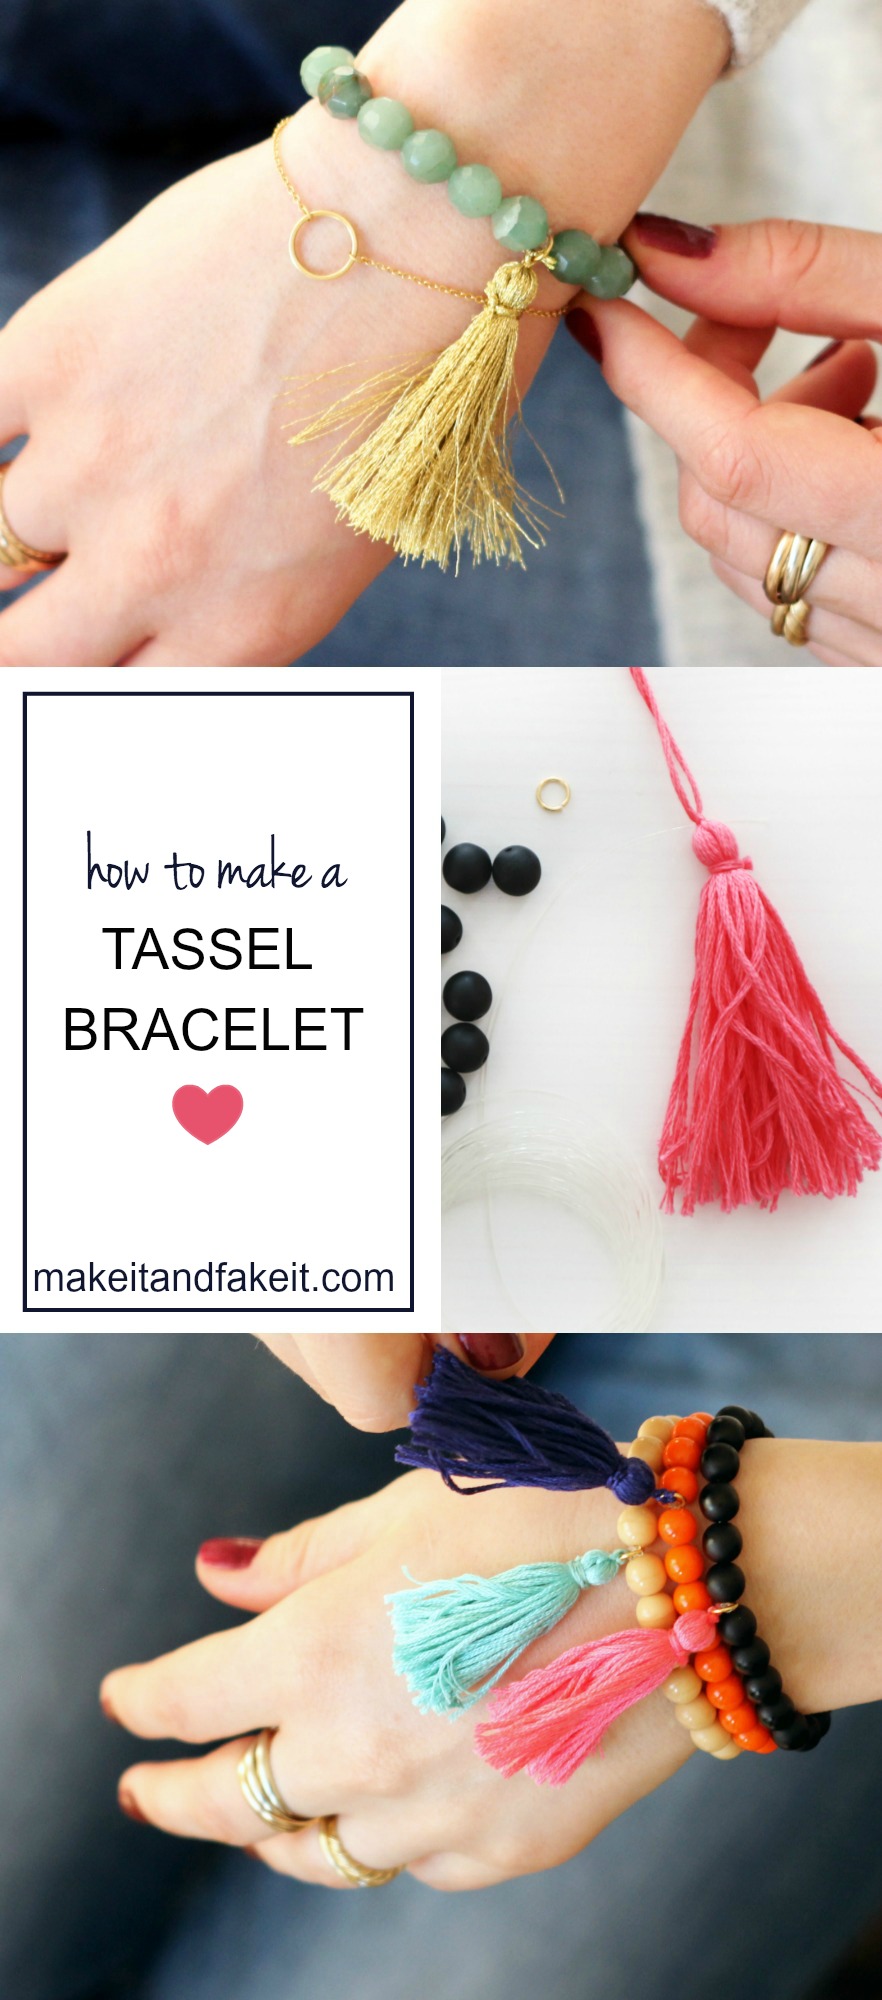 How to Make a Tassel Bracelet by Make It and Fake It